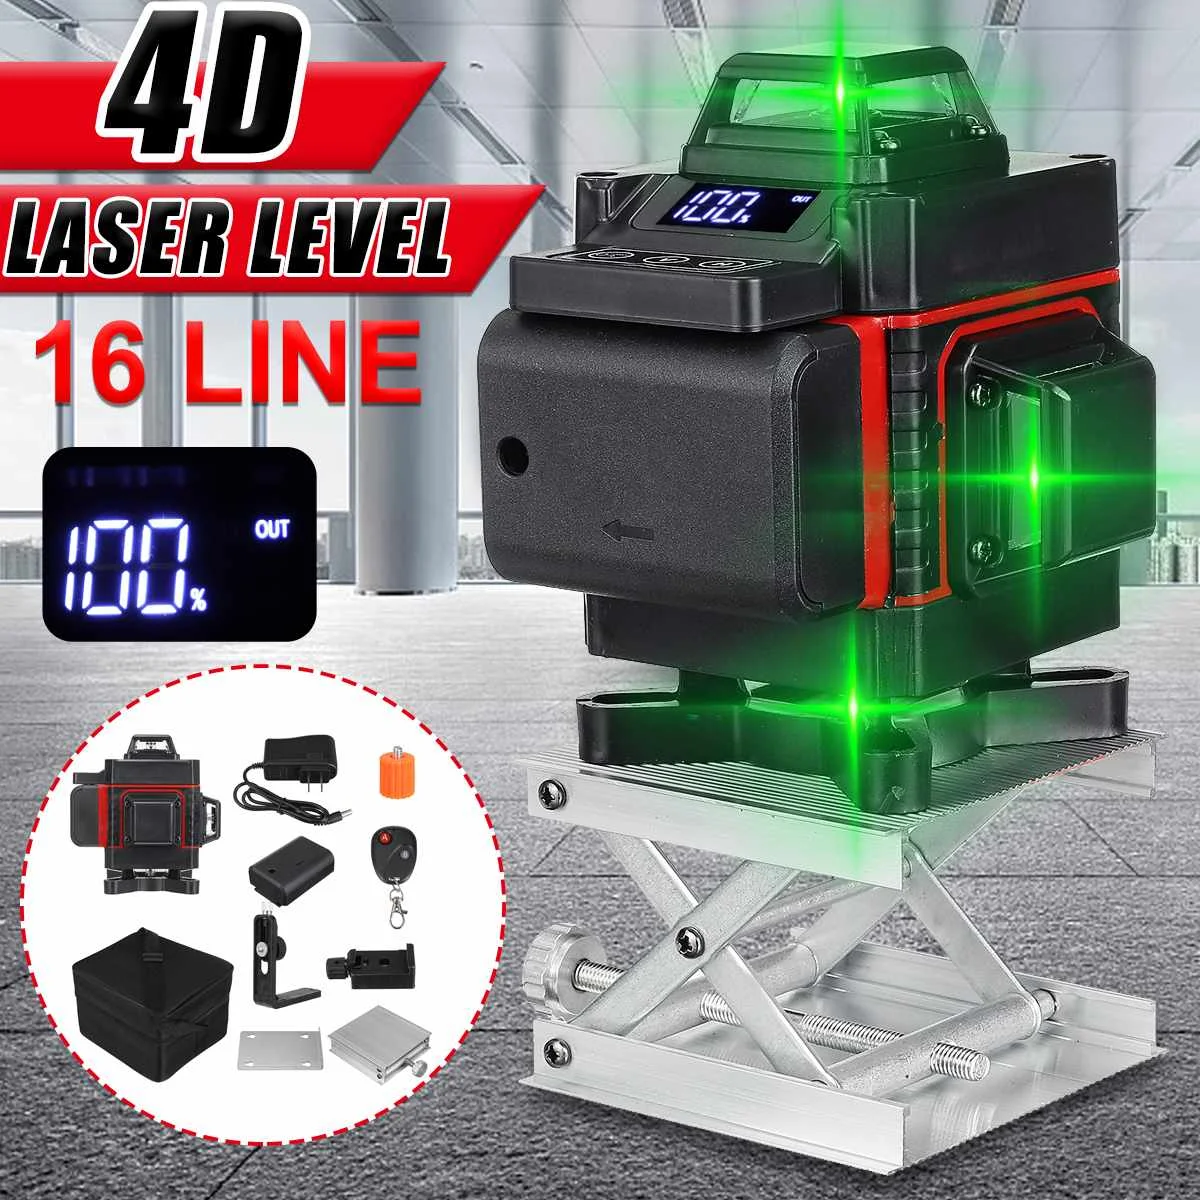 16 Lines 4D Green Laser Level Auto Self-Leveling 360 Horizontal And Vertical Cross Lines Super Powerful Green Laser Beam Line